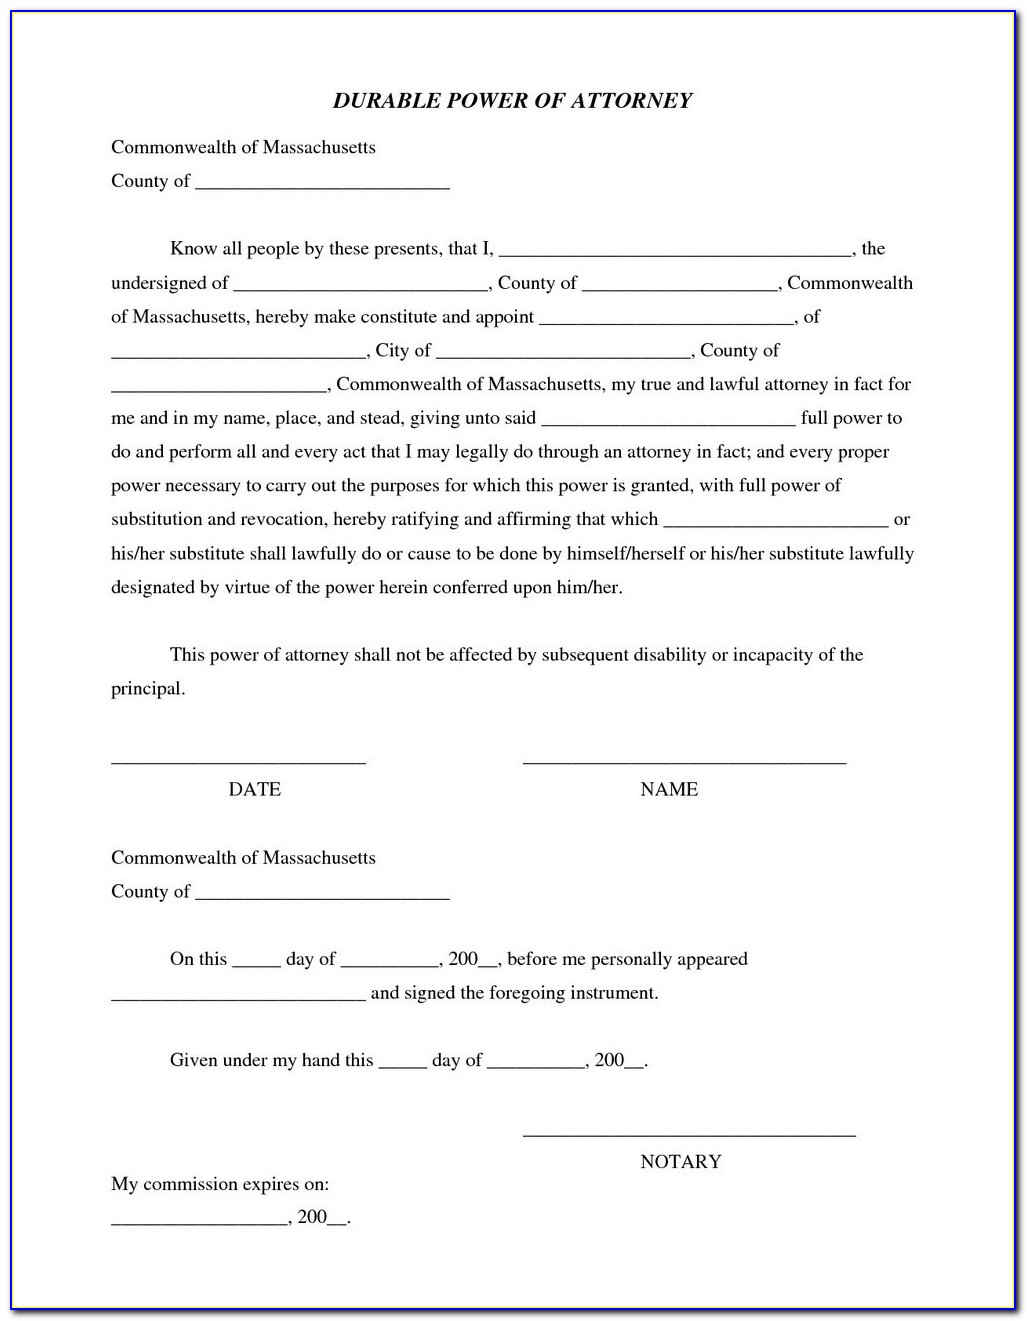 Nys Durable Power Of Attorney Form 2015